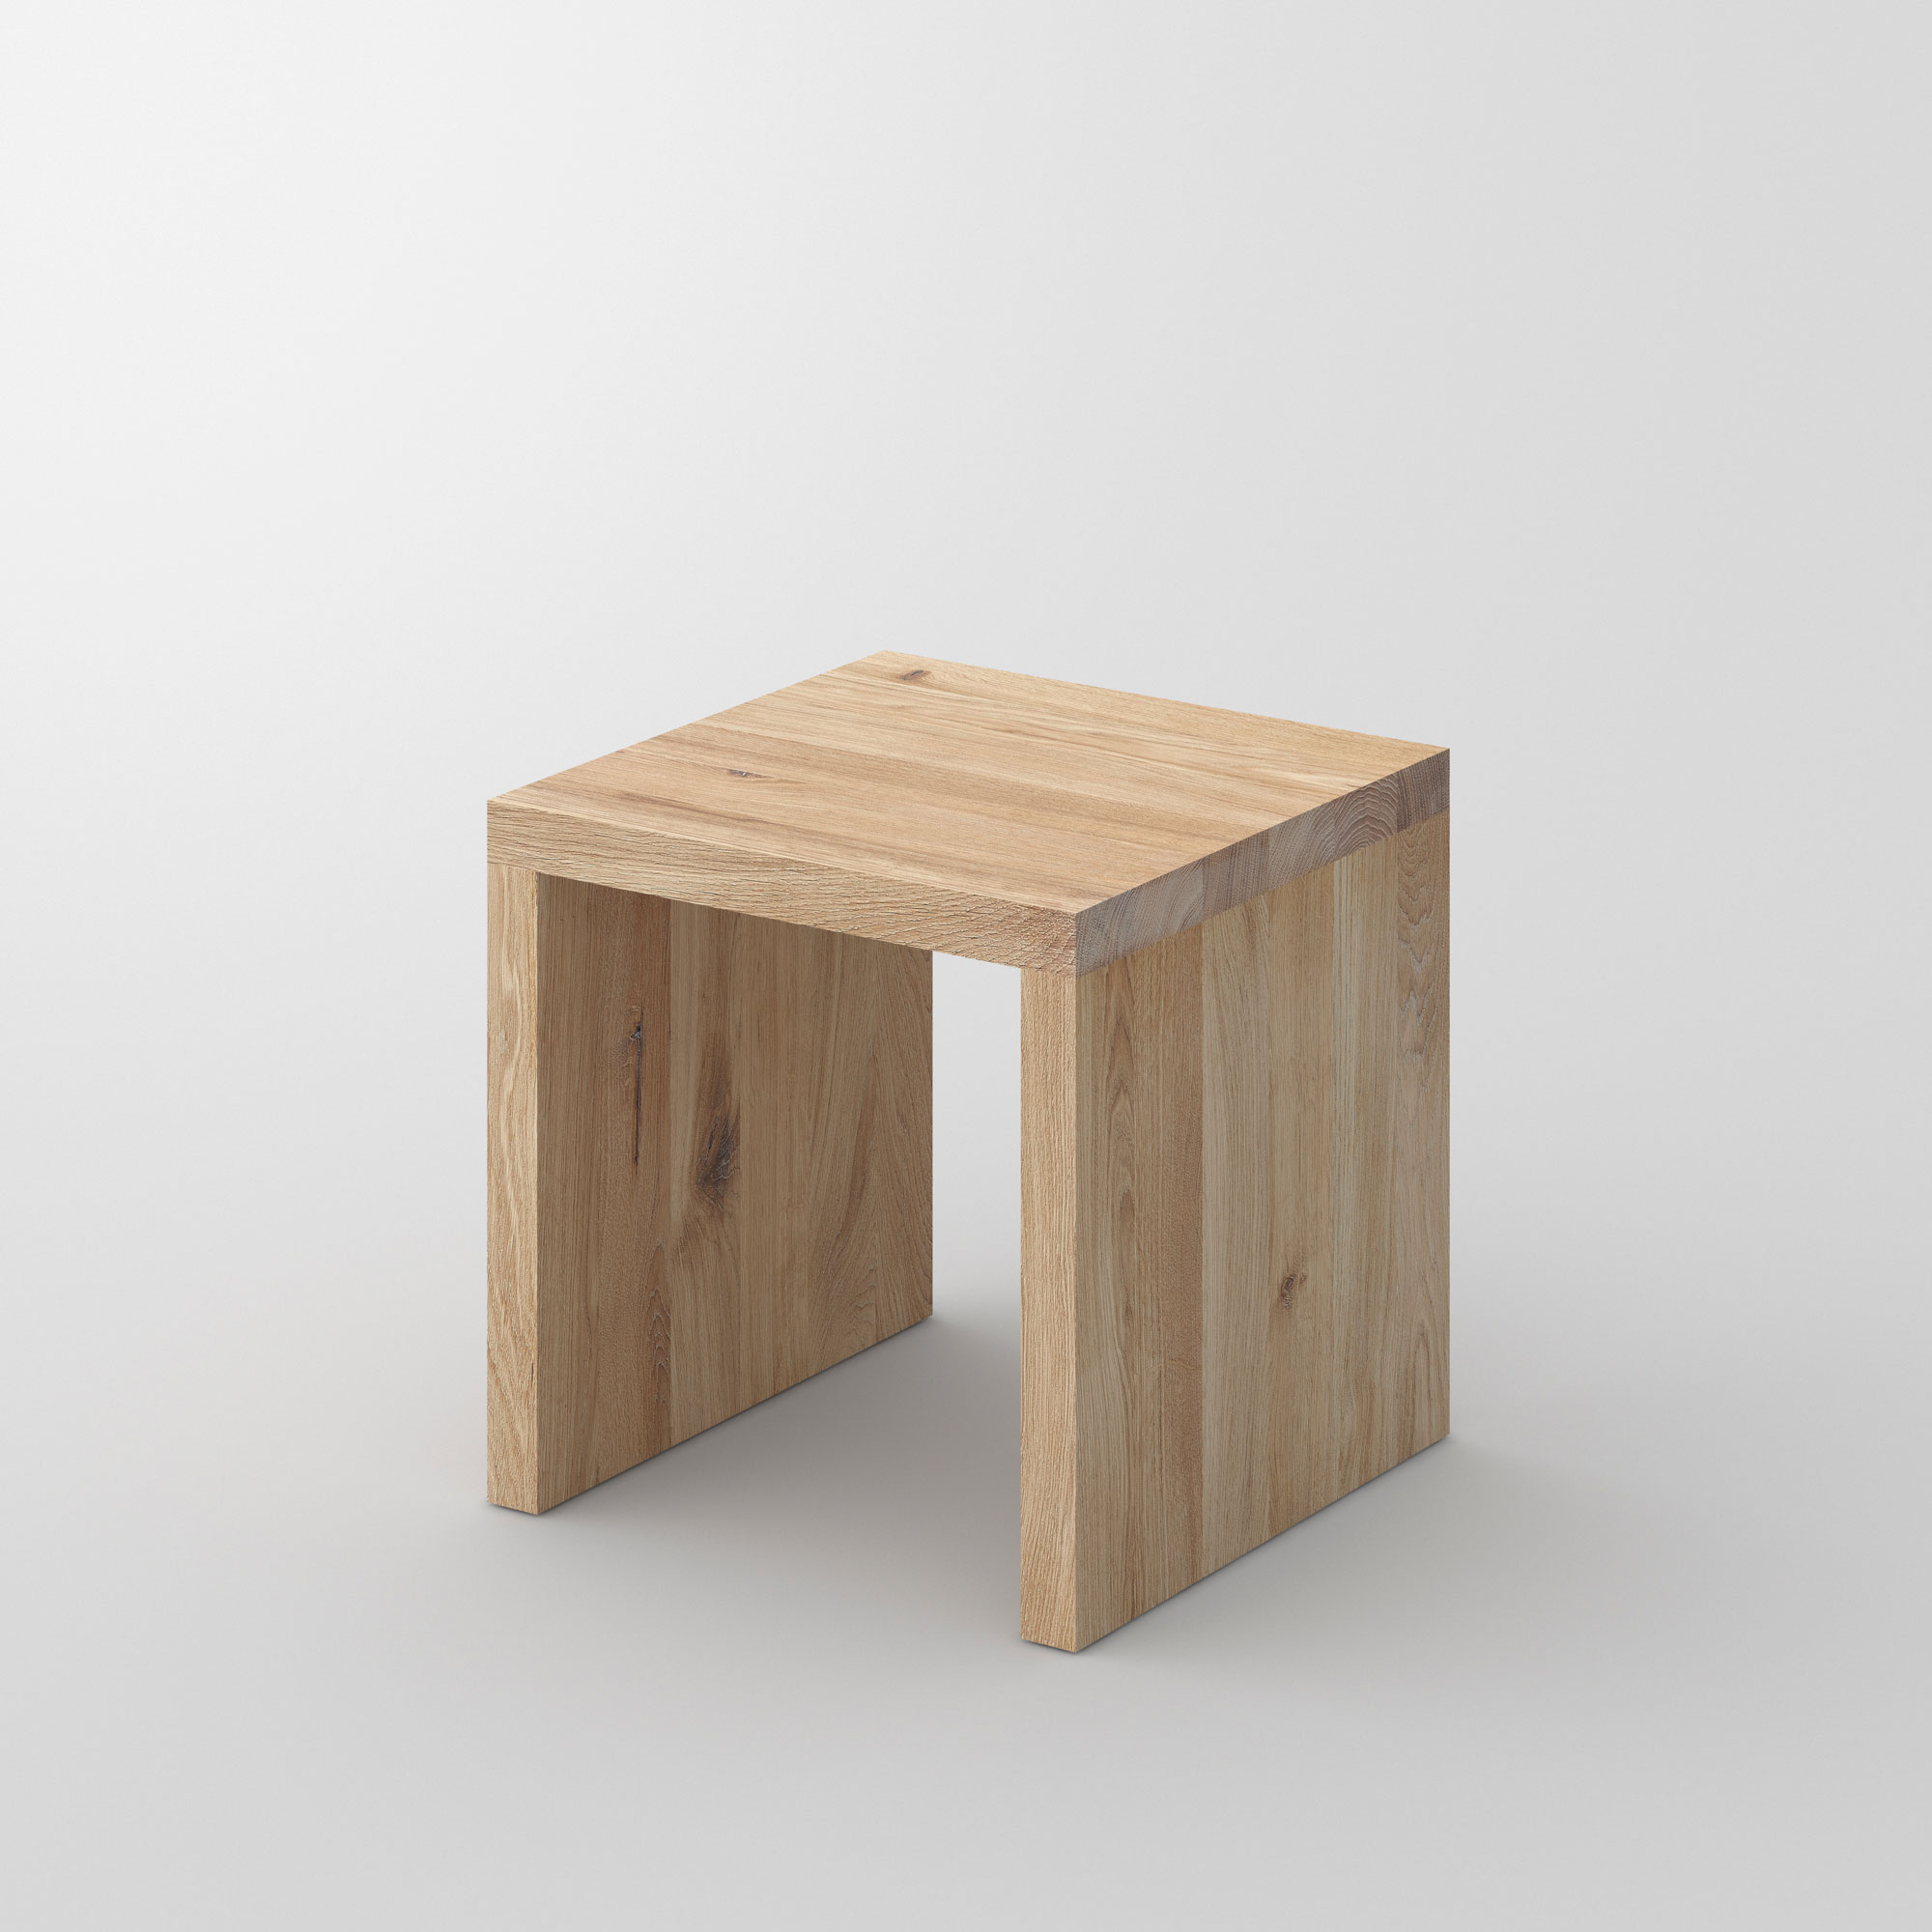 Multifunctional Solid Wood Stool MENA 4 cam1 custom made in solid wood by vitamin design